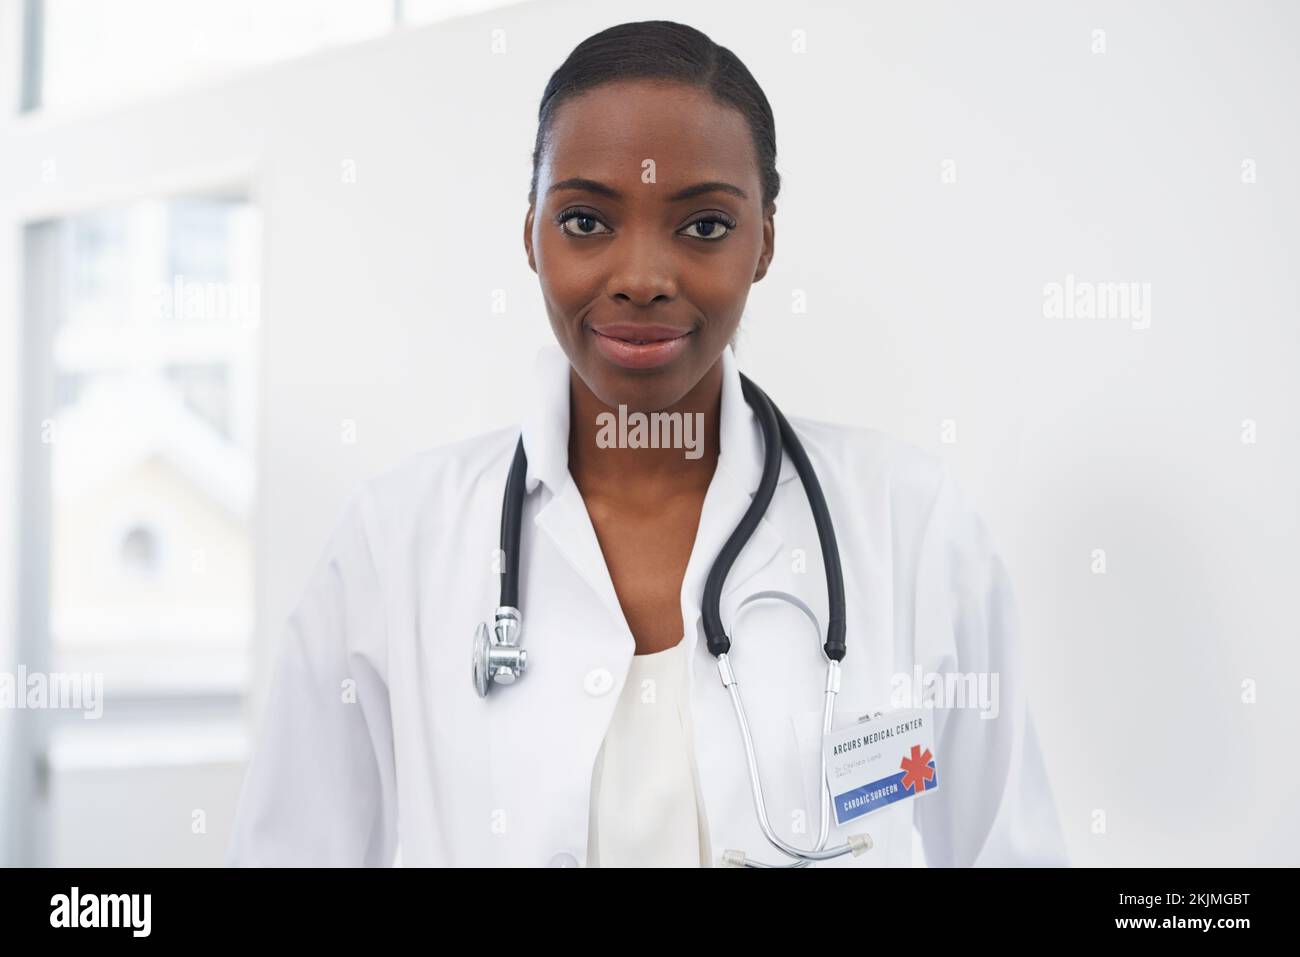 Shes dedicate to advancing medicine. Portrait of a female doctor standing in a room. Stock Photo